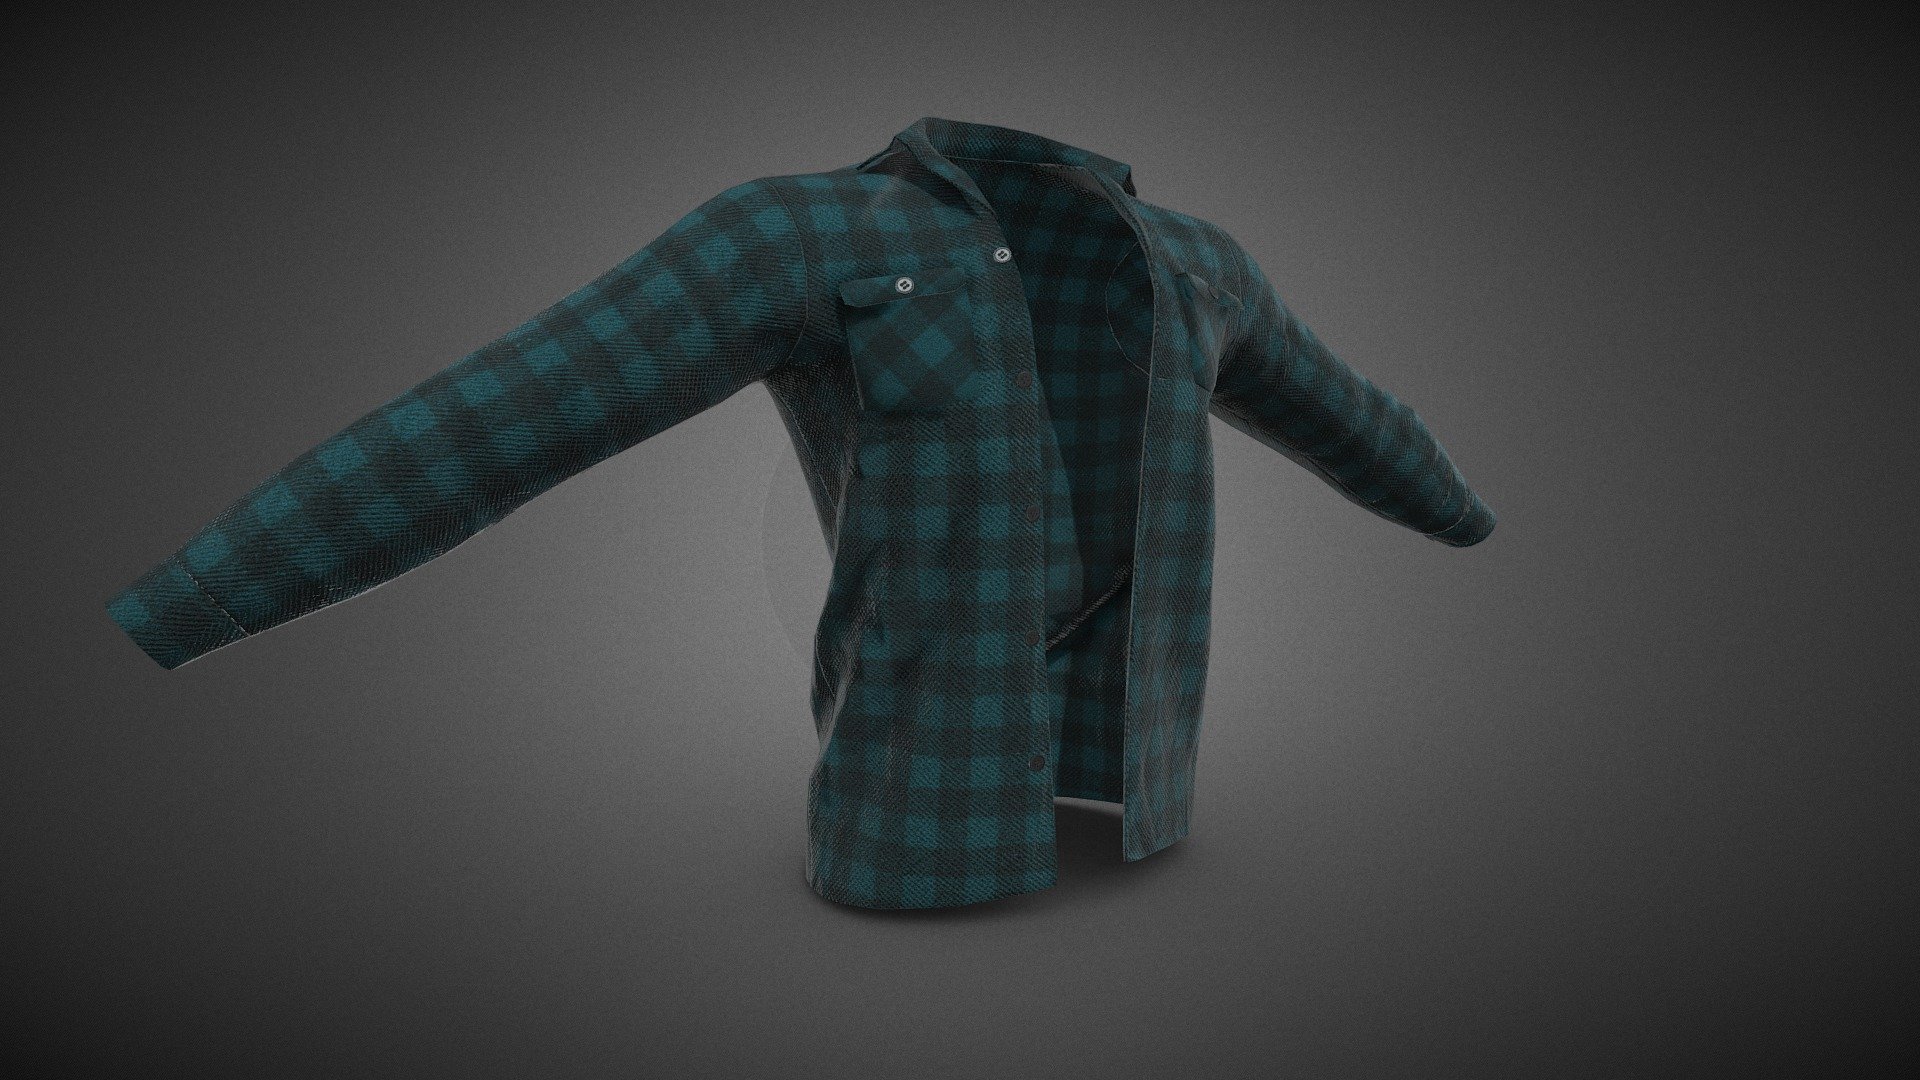 CG StudioX Present :
Cyan Flannel Shirt lowpoly/PBR




This is Cyan Flannel Shirt Comes with Specular and Metalness PBR.

The photo been rendered using Marmoset Toolbag 4 (real time game engine )


Features :



Comes with Specular and Metalness PBR 4K texture .

Good topology.

Low polygon geometry.

The Model is prefect for game for both Specular workflow as in Unity and Metalness as in Unreal engine .

The model also rendered using Marmoset Toolbag 4 with both Specular and Metalness PBR and also included in the product with the full texture.

The texture can be easily adjustable .


Texture :



One set of UV [Albedo -Normal-Metalness -Roughness-Gloss-Specular-Ao] (4096*4096)


Files :
Marmoset Toolbag 4 ,Maya,,FBX,OBj with all the textures.




Contact me for if you have any questions.
 - Cyan Flannel Shirt - Buy Royalty Free 3D model by CG StudioX (@CG_StudioX) 3d model